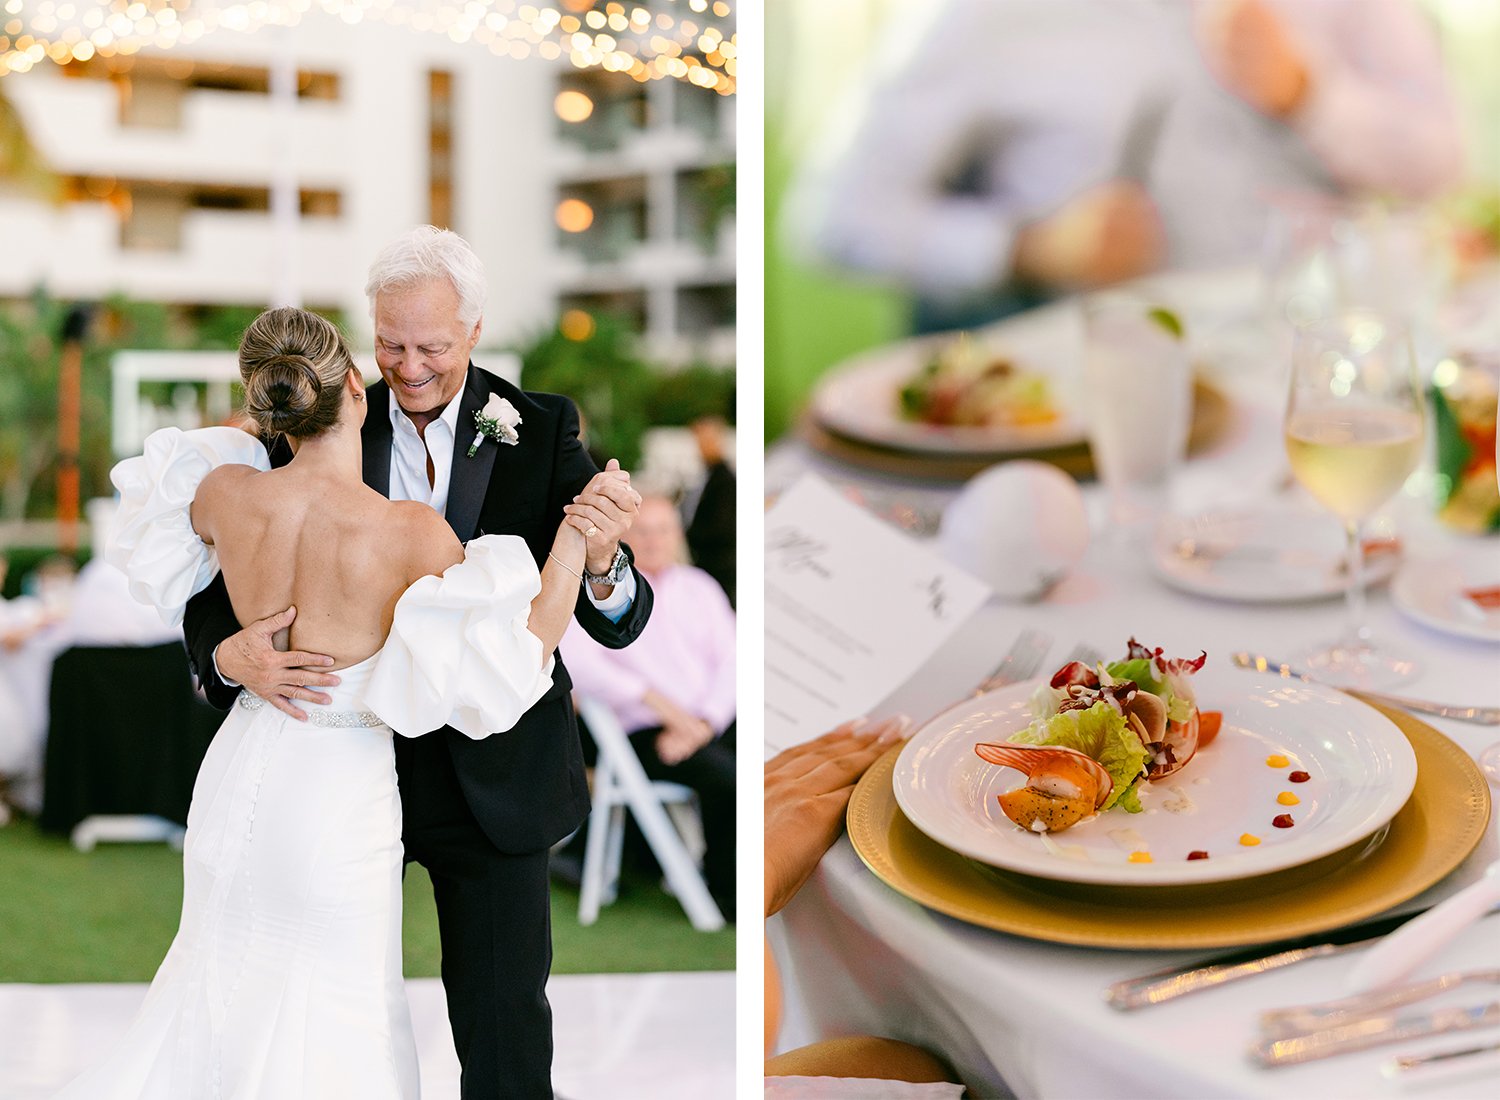 54 cute bride in white wedding dress dancing with her father on her first dance and close up of gourmet dish at wedding reception at Dreams Riviera Cancun.JPG